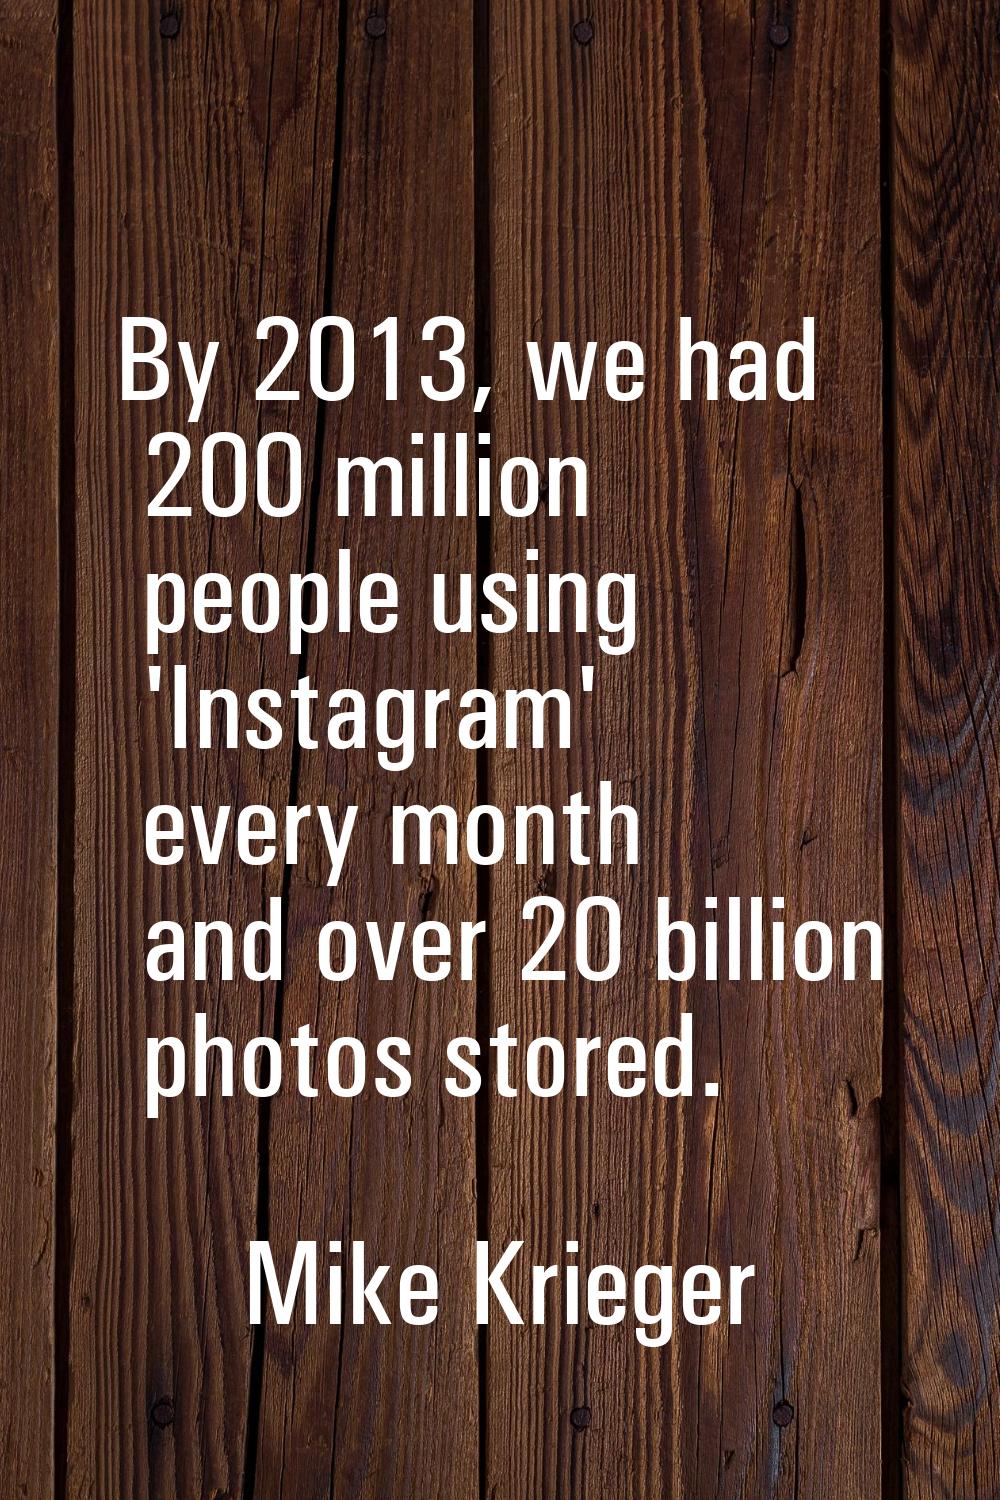 By 2013, we had 200 million people using 'Instagram' every month and over 20 billion photos stored.